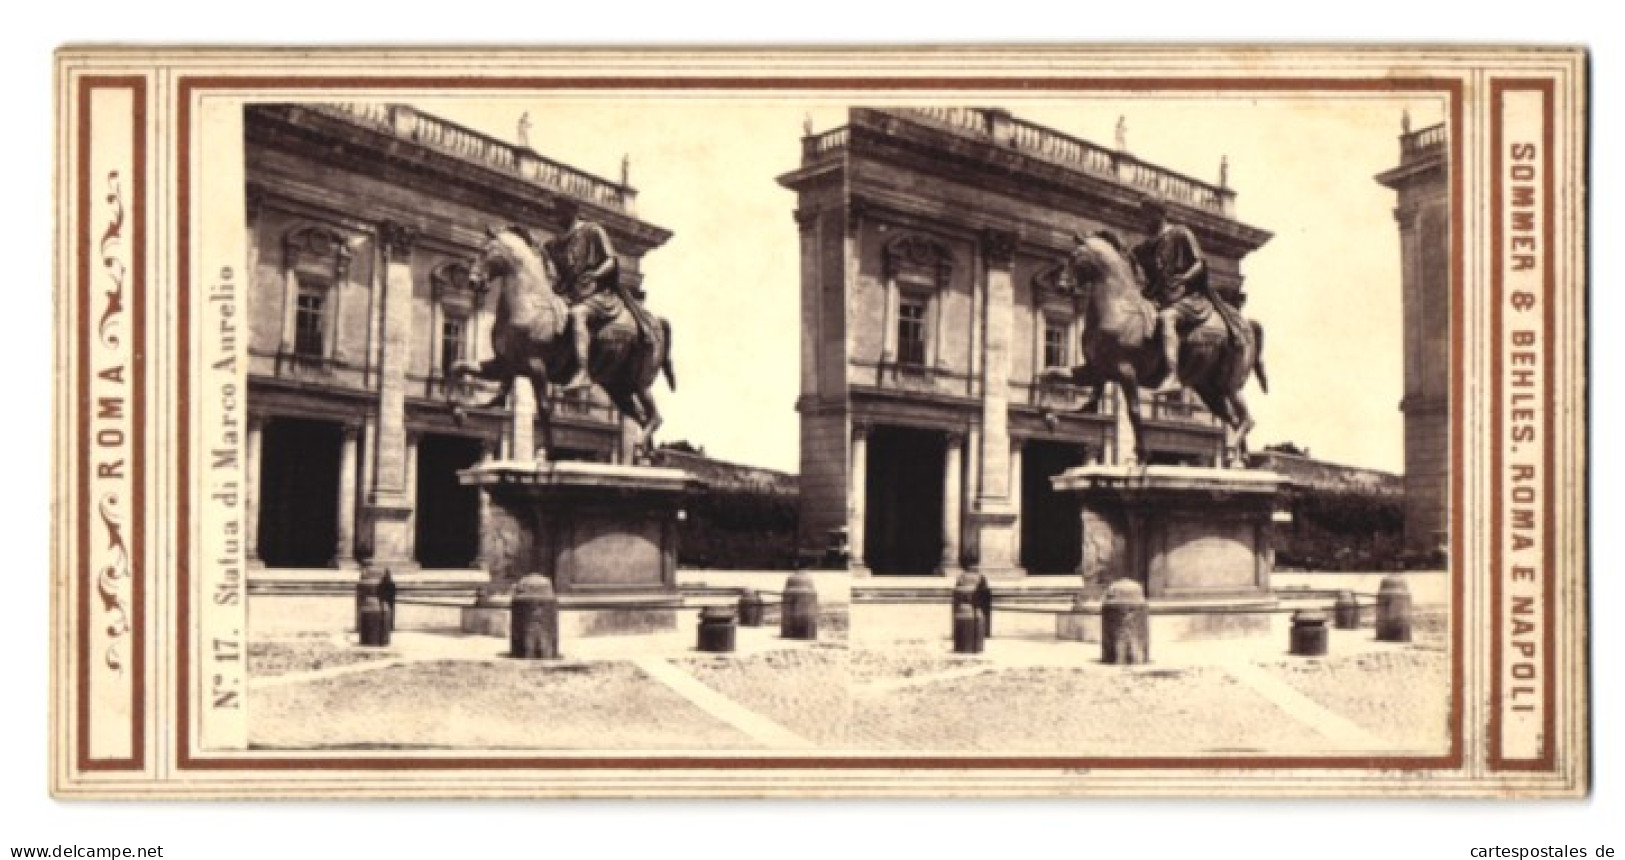 Stereo-Foto Sommer & Behles, Roma, Ansicht Roma, Statue Di Marco Aurelio  - Stereoscopic